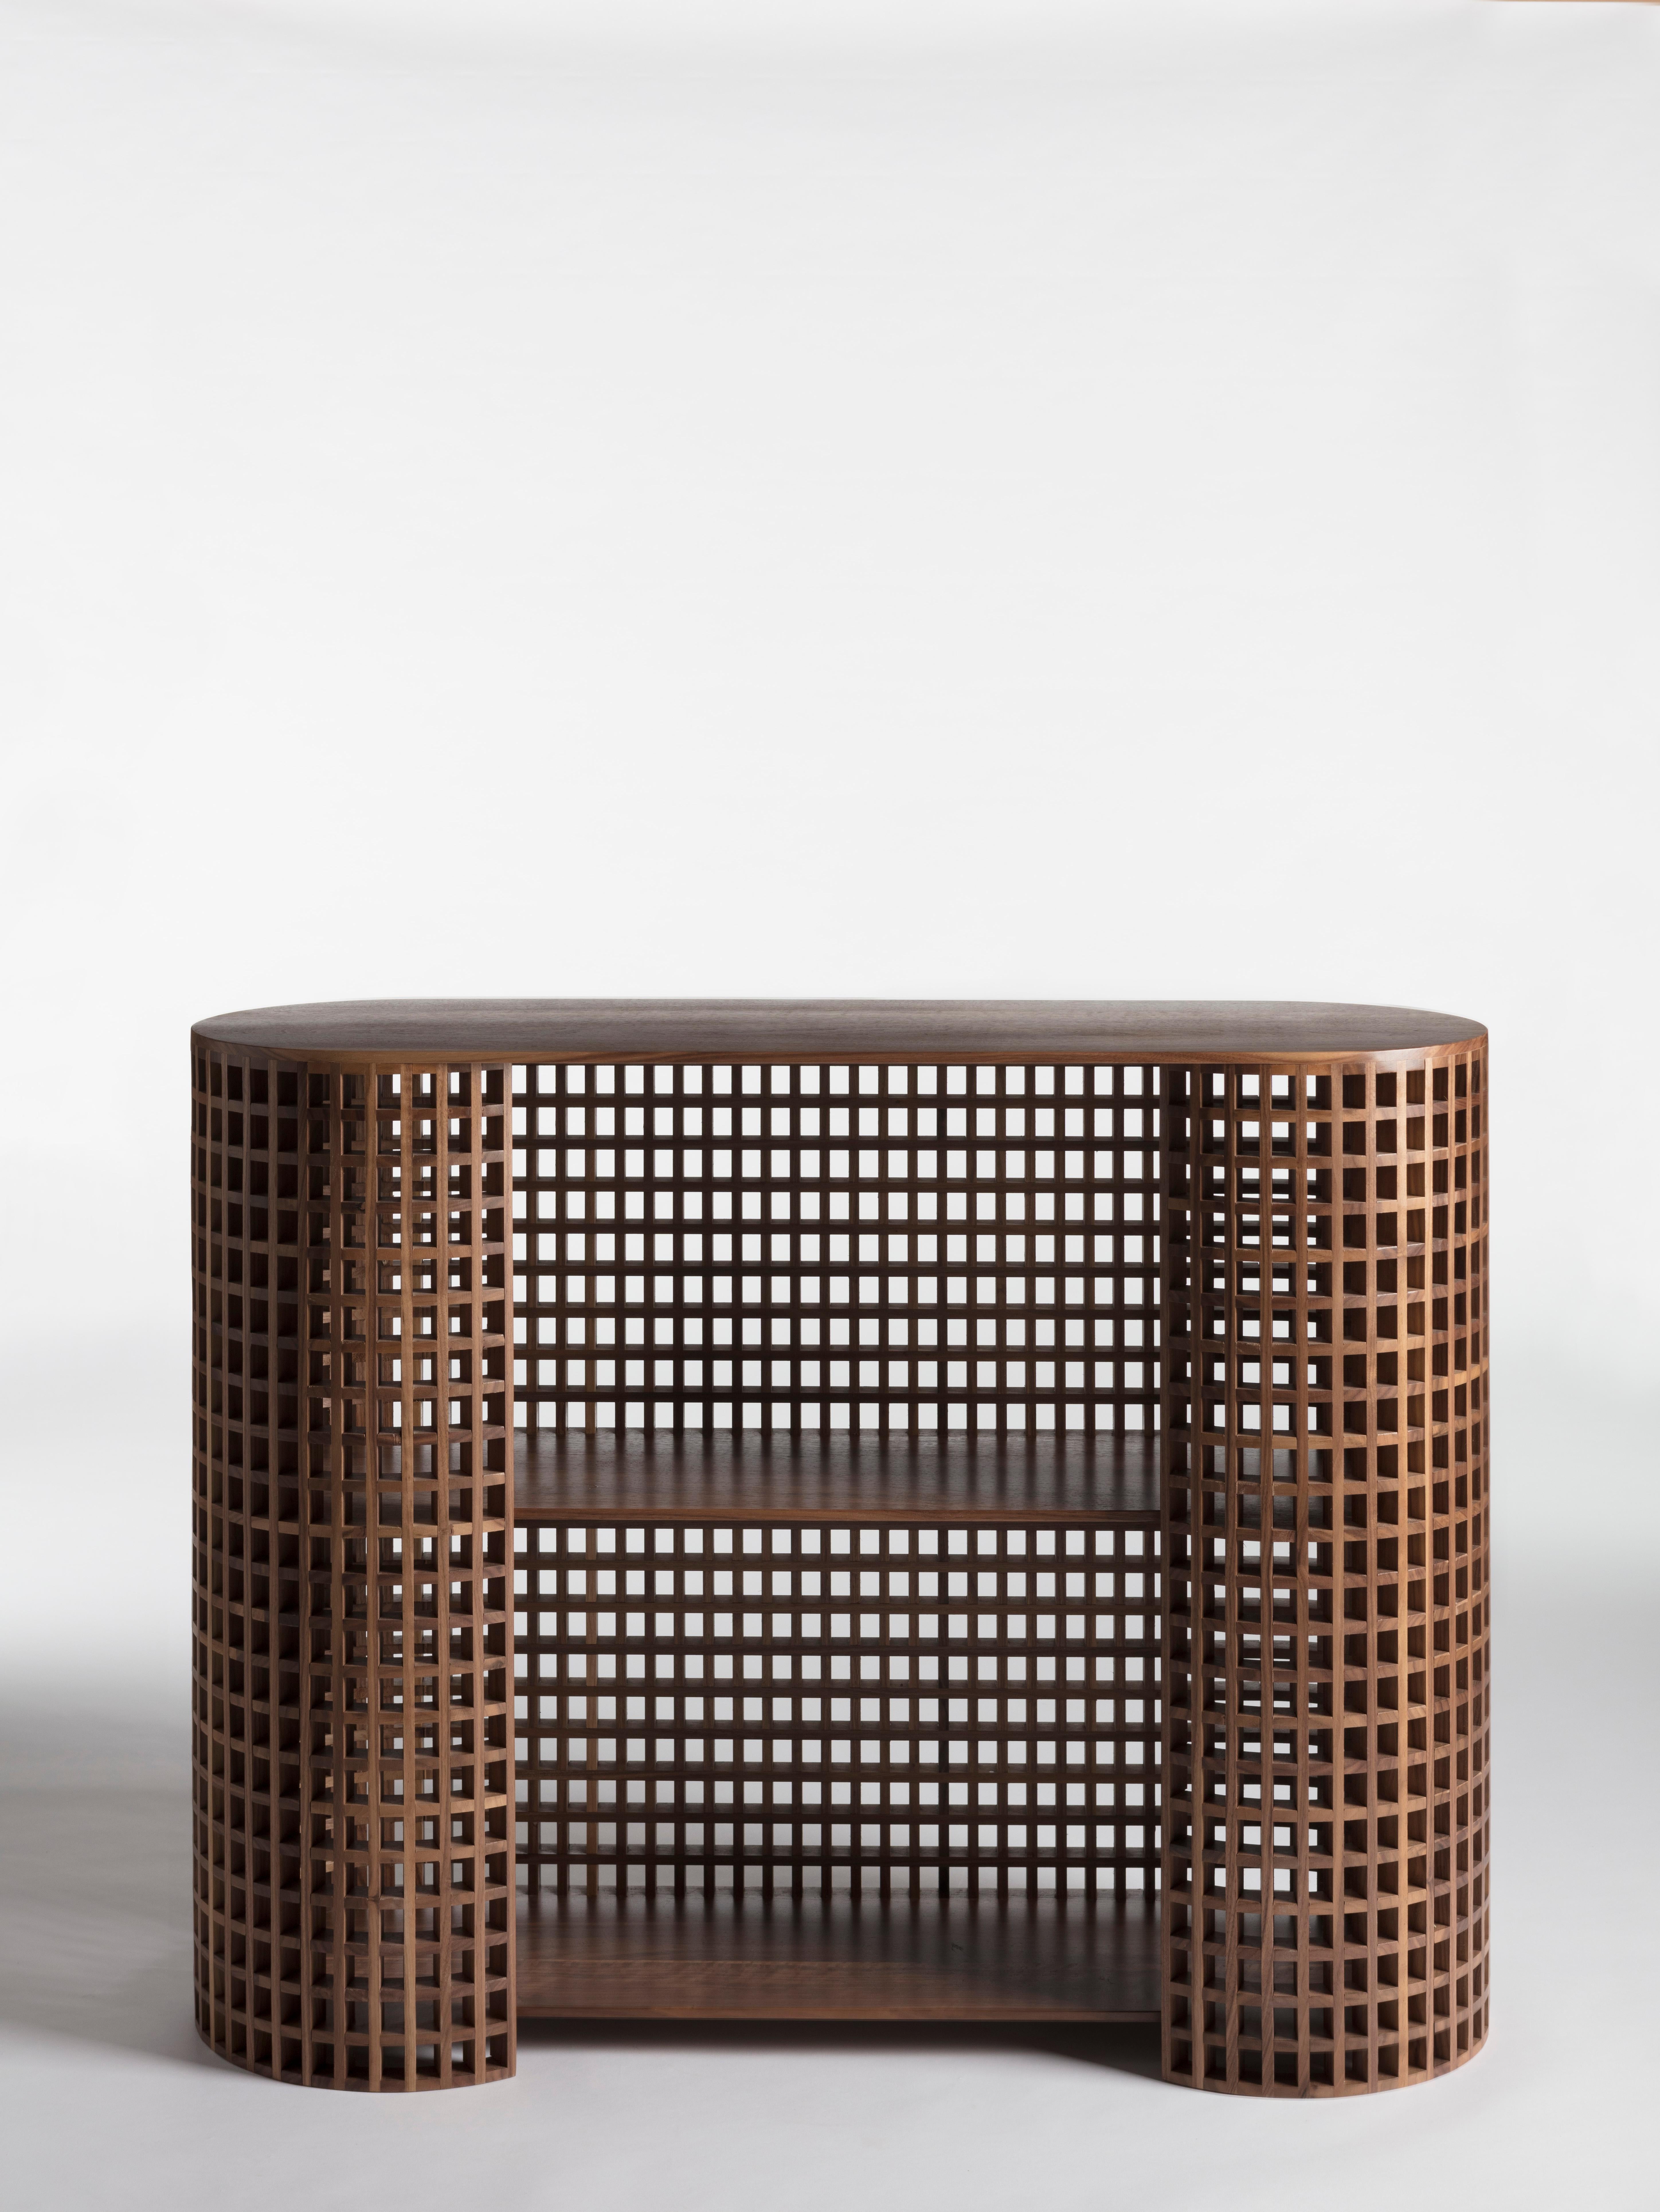 Carabottino is a contemporary and crafted cabinet, a sideboard with shelvs in European walnut, it is a wooden grating that is presented in a two-dimensional form traditionally made of wooden
strips, it is considered to be an accessory element of